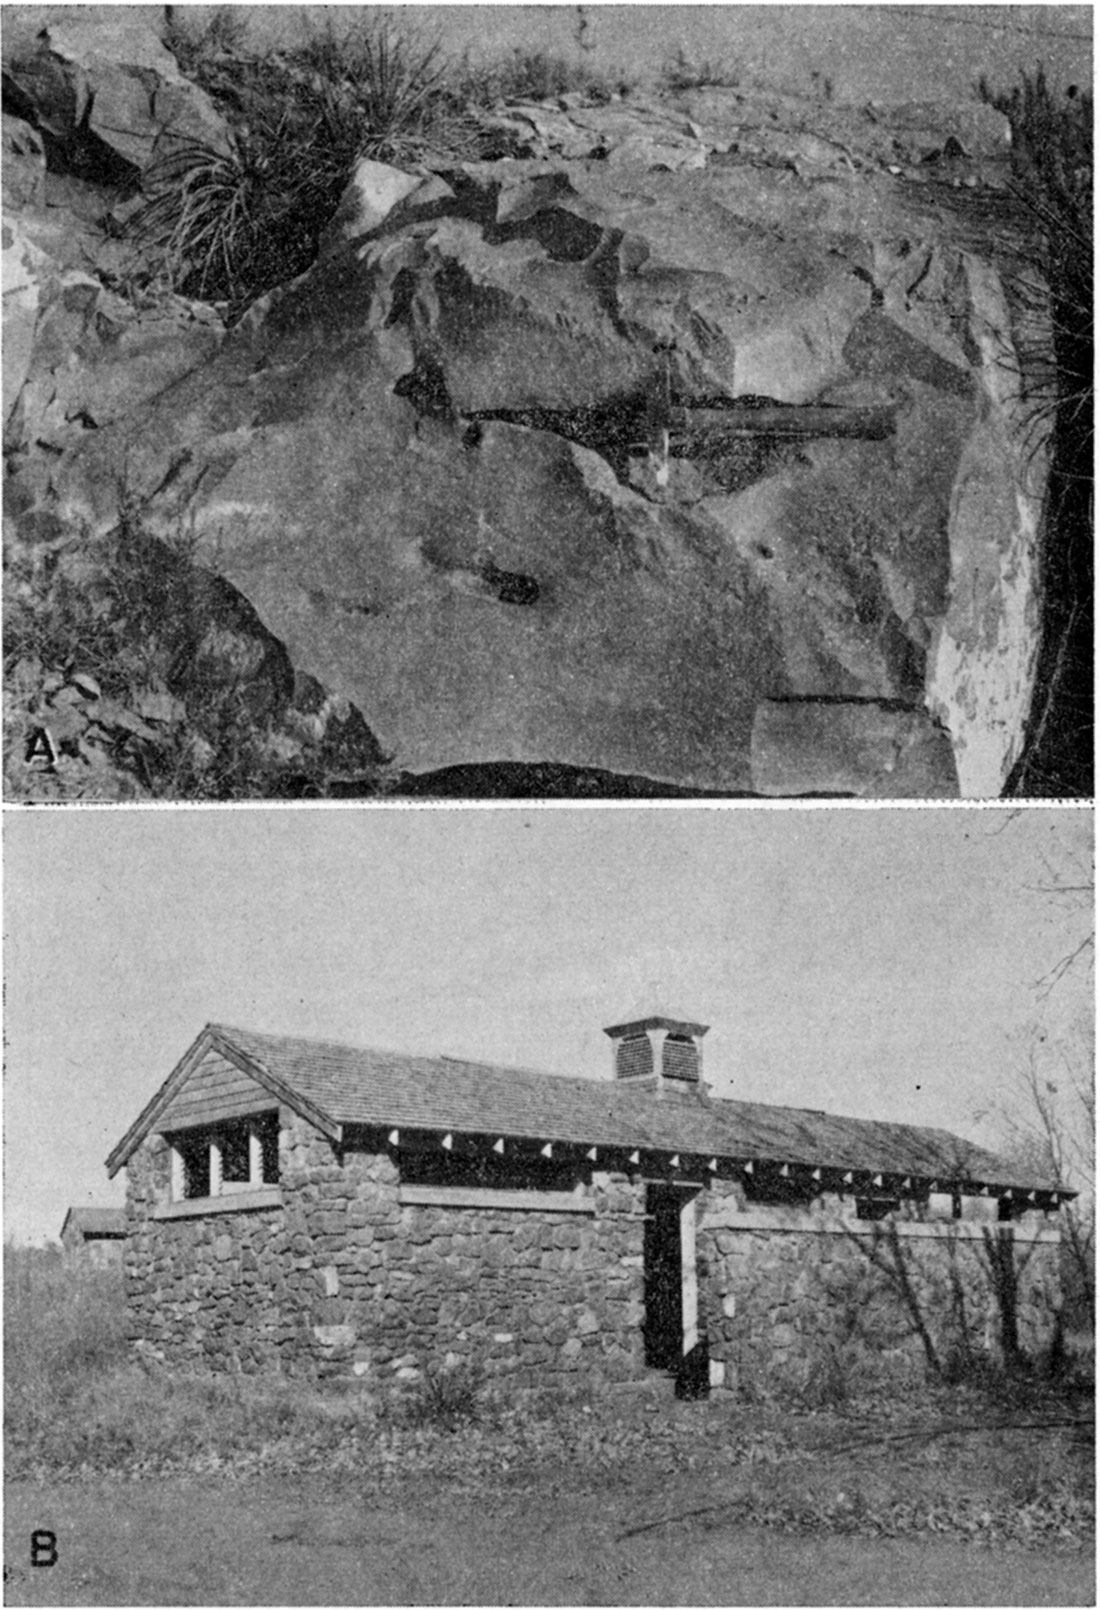 Two black and white photos; top is of large piece of quartzite in outcrop; bottom is of small picnic shelter made of quartzite.